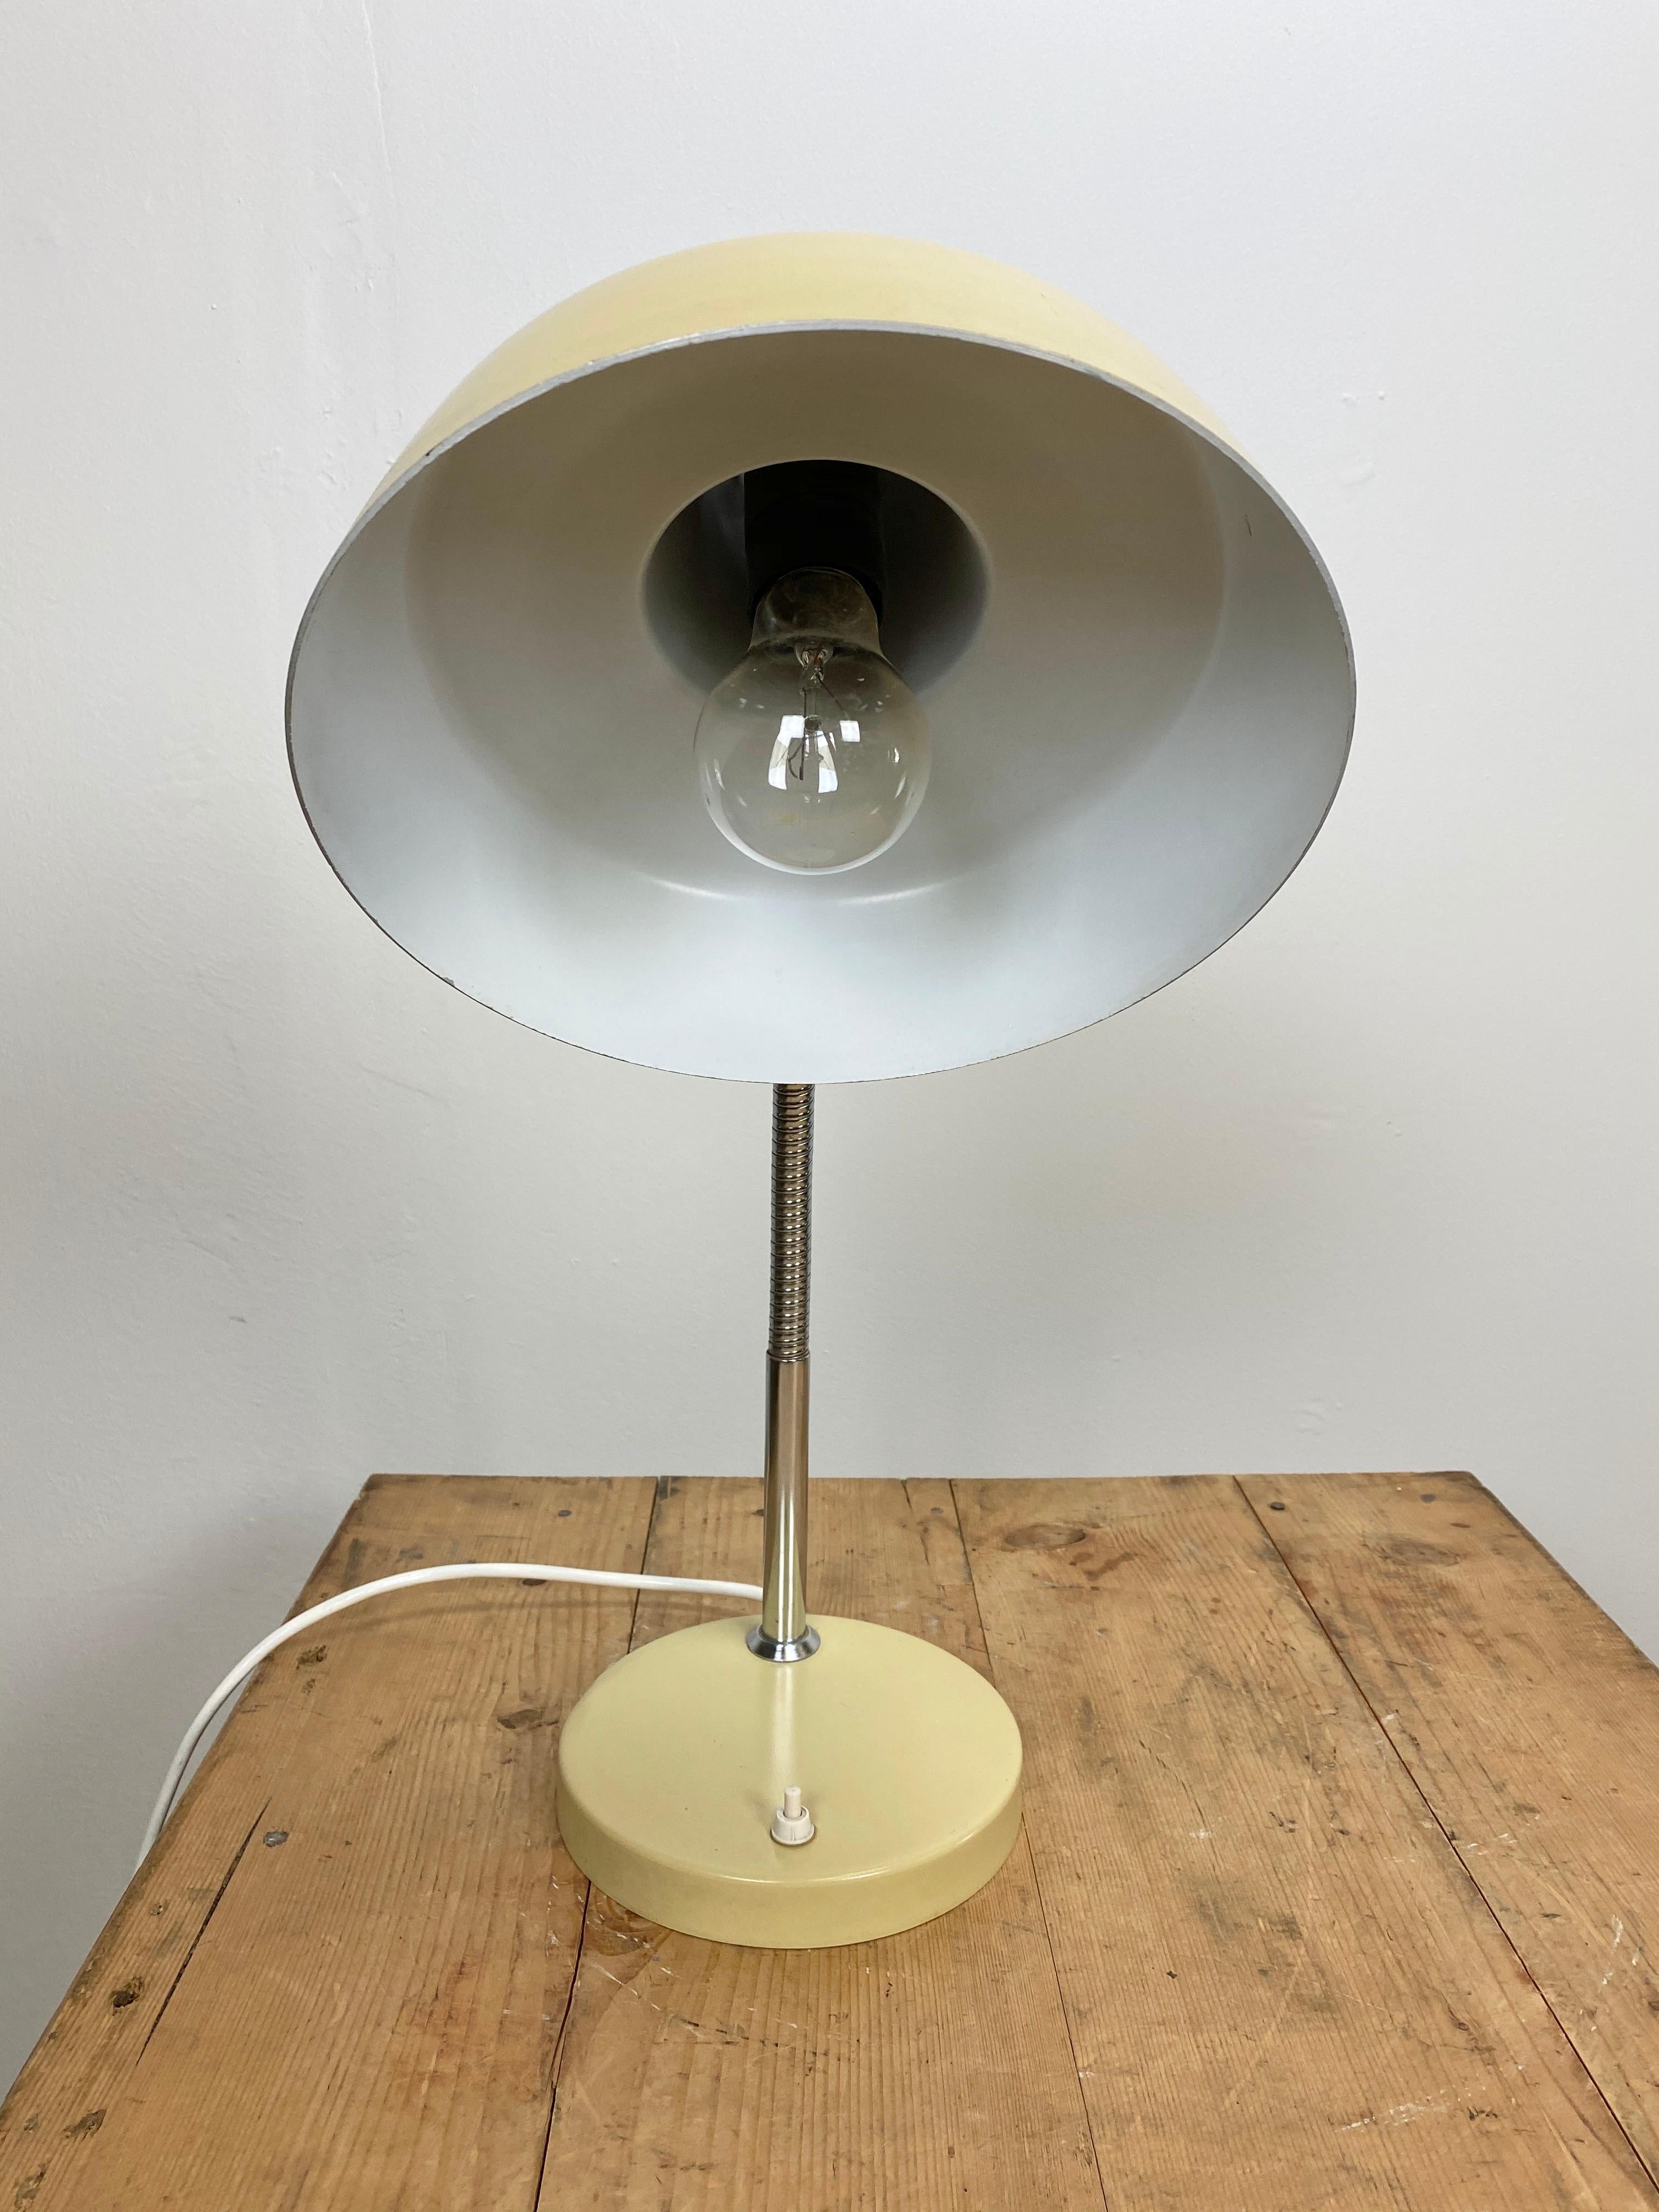 Painted Beige Gooseneck Table Lamp, 1960s For Sale